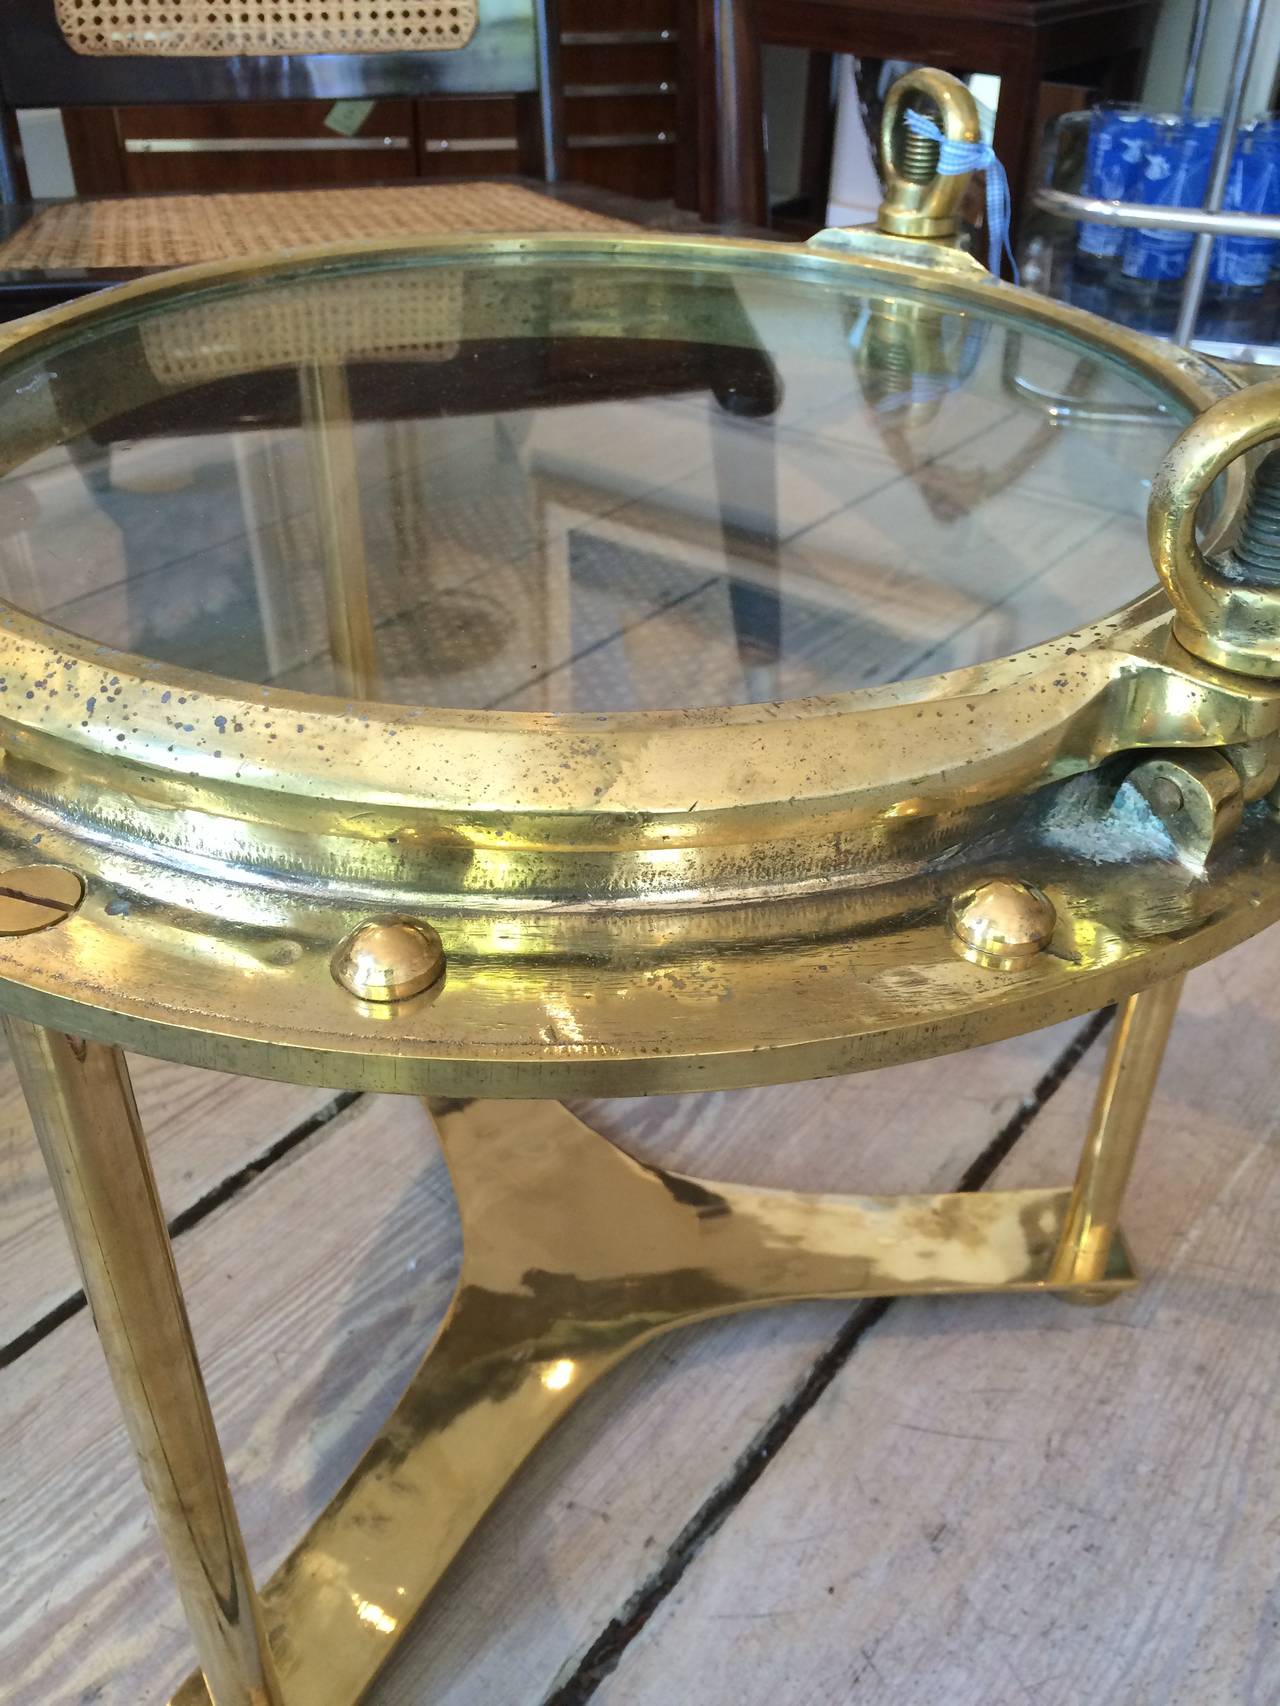 A fabulous pair of solid brass portholes from a merchant ship converted to tables complete with a working window and re-installed rivets. Can also be disassembled for easy transport.

Nautical antiques and artifacts located on Nantucket Island.